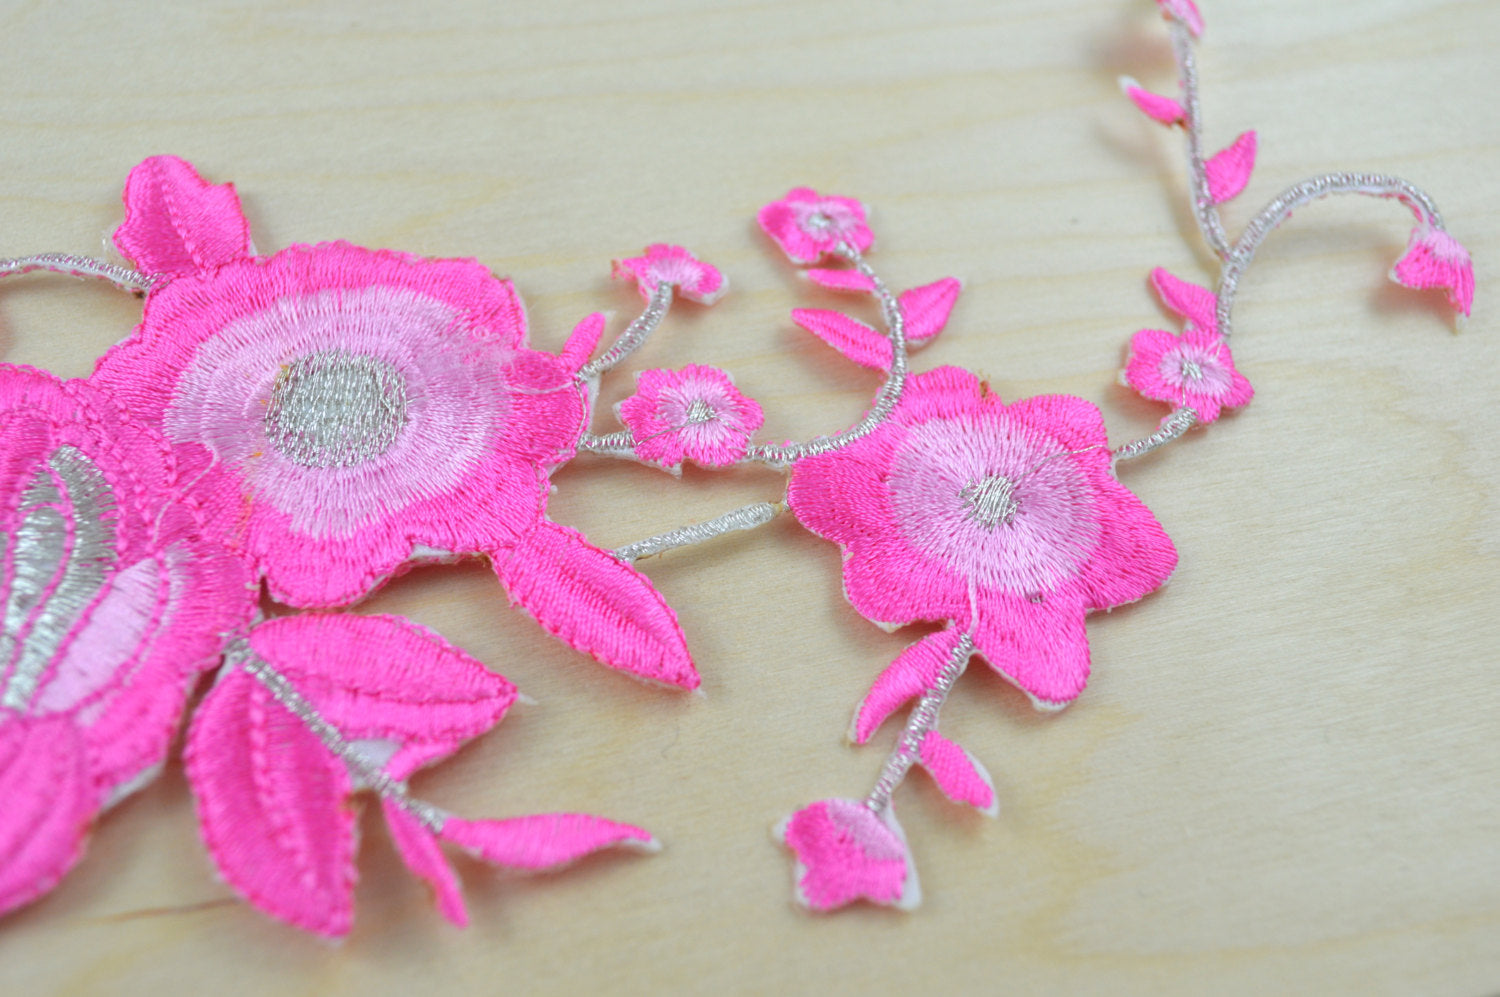 2 Pink Flower With Silver Accents Embroidery Patches/Applique